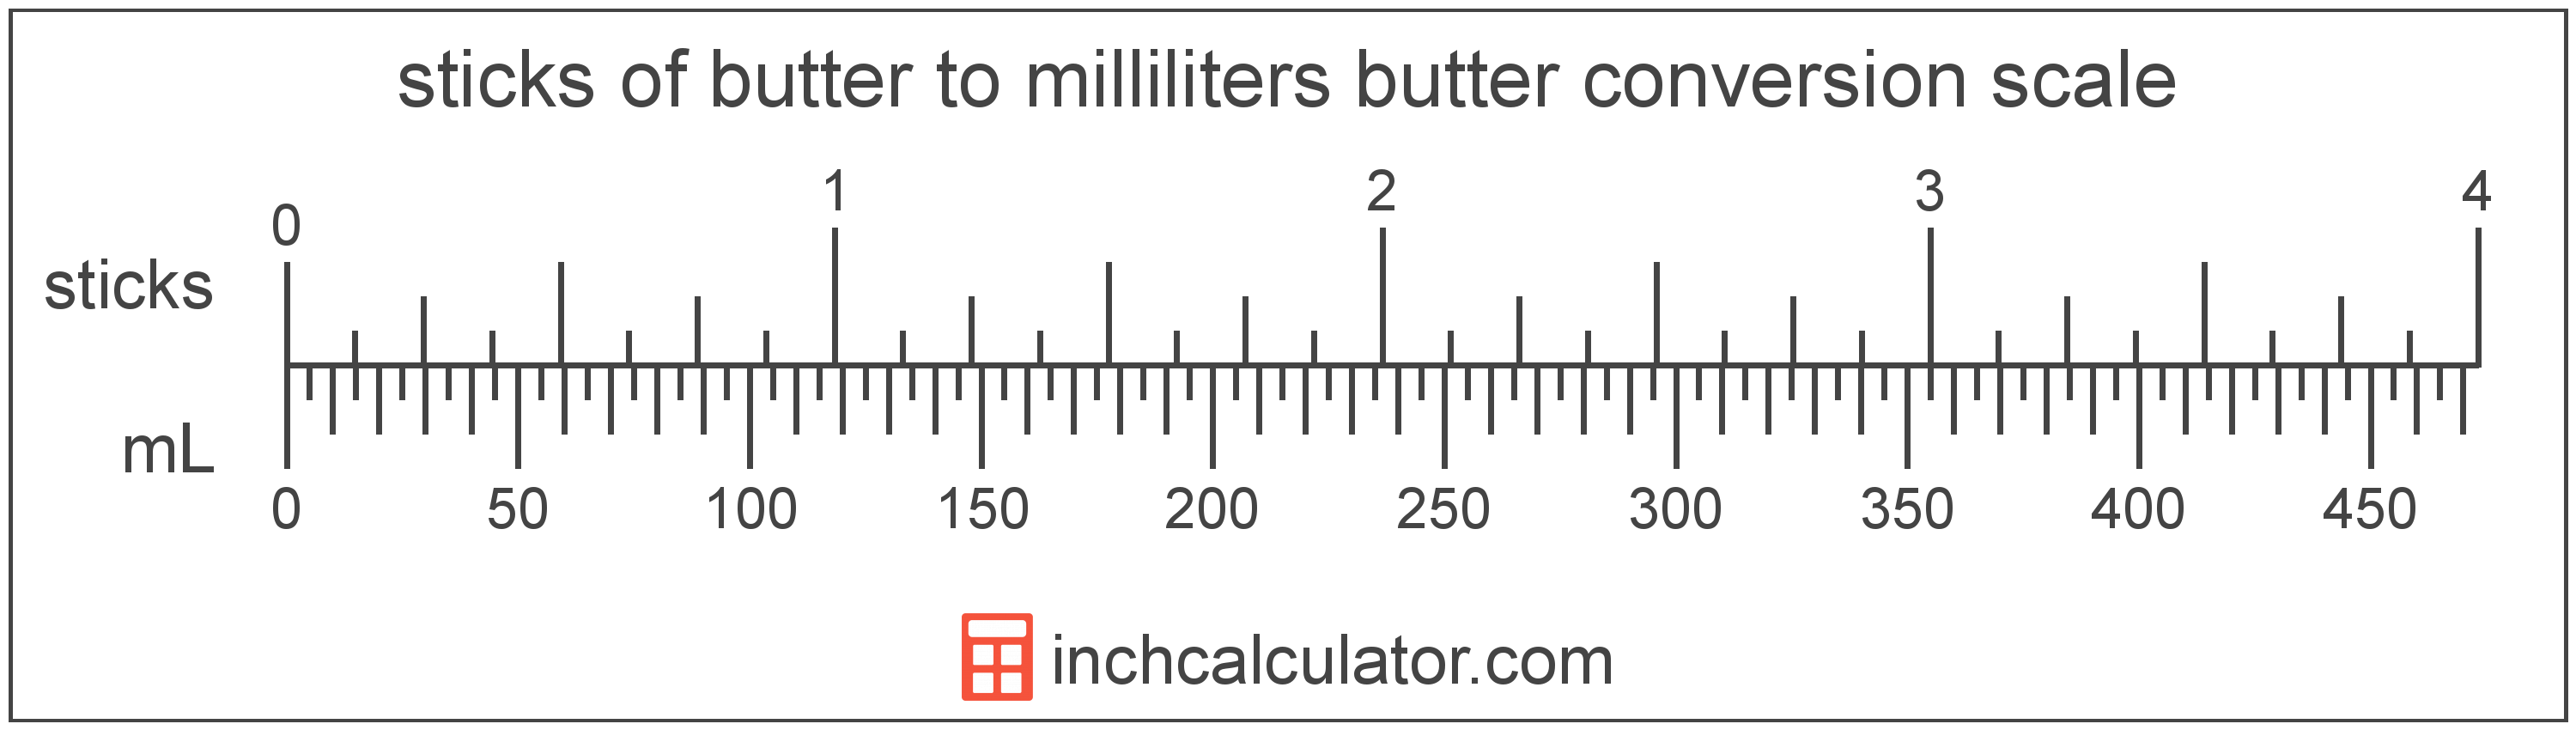 conversion scale showing milliliters and equivalent sticks of butter butter values